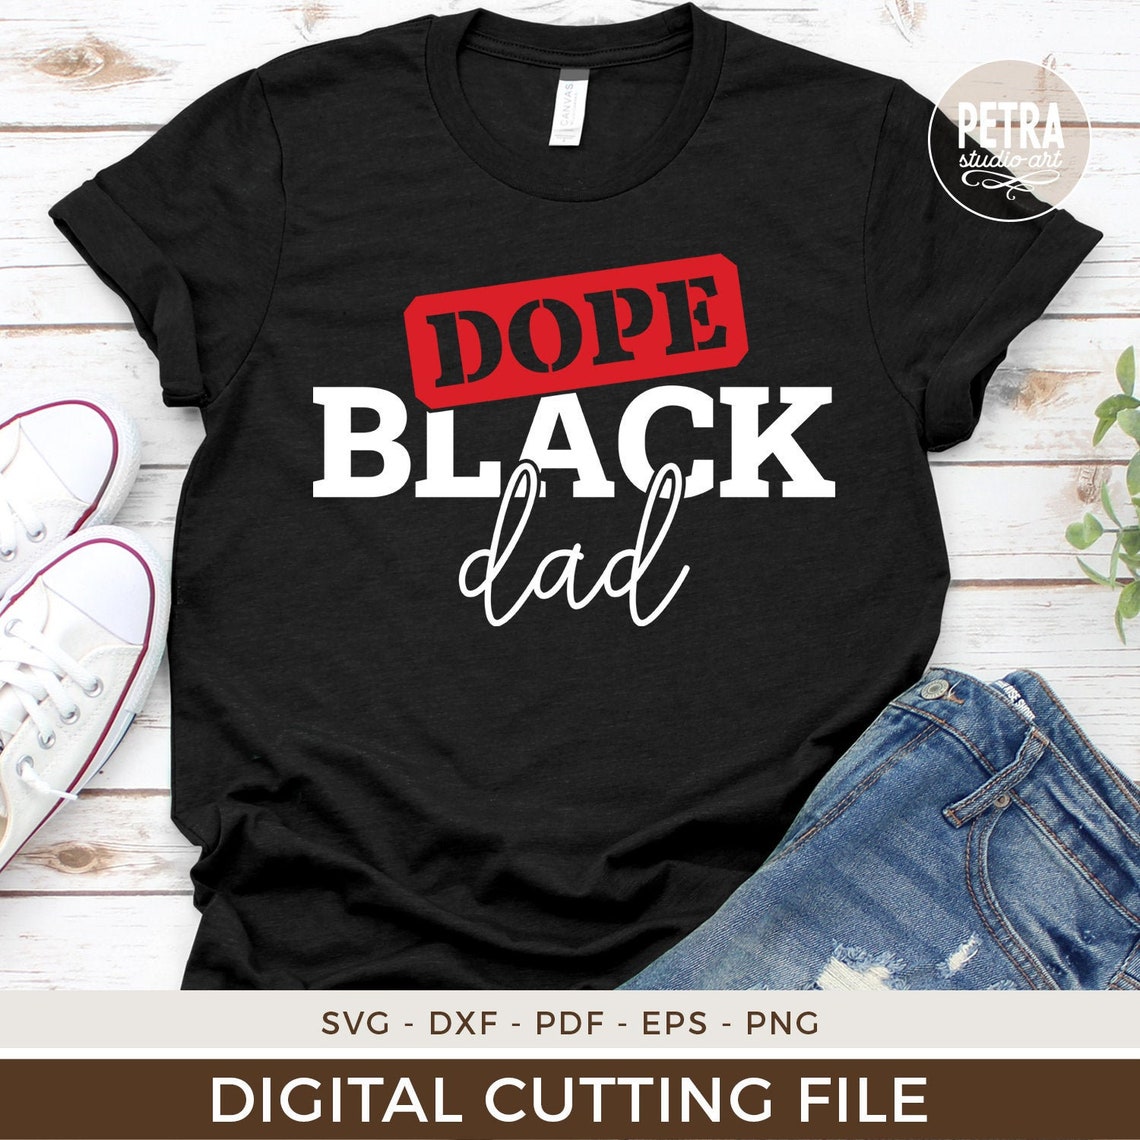 Download Dope Black Dad SVG Six Files. Melanin SVG. For Personal and | Etsy